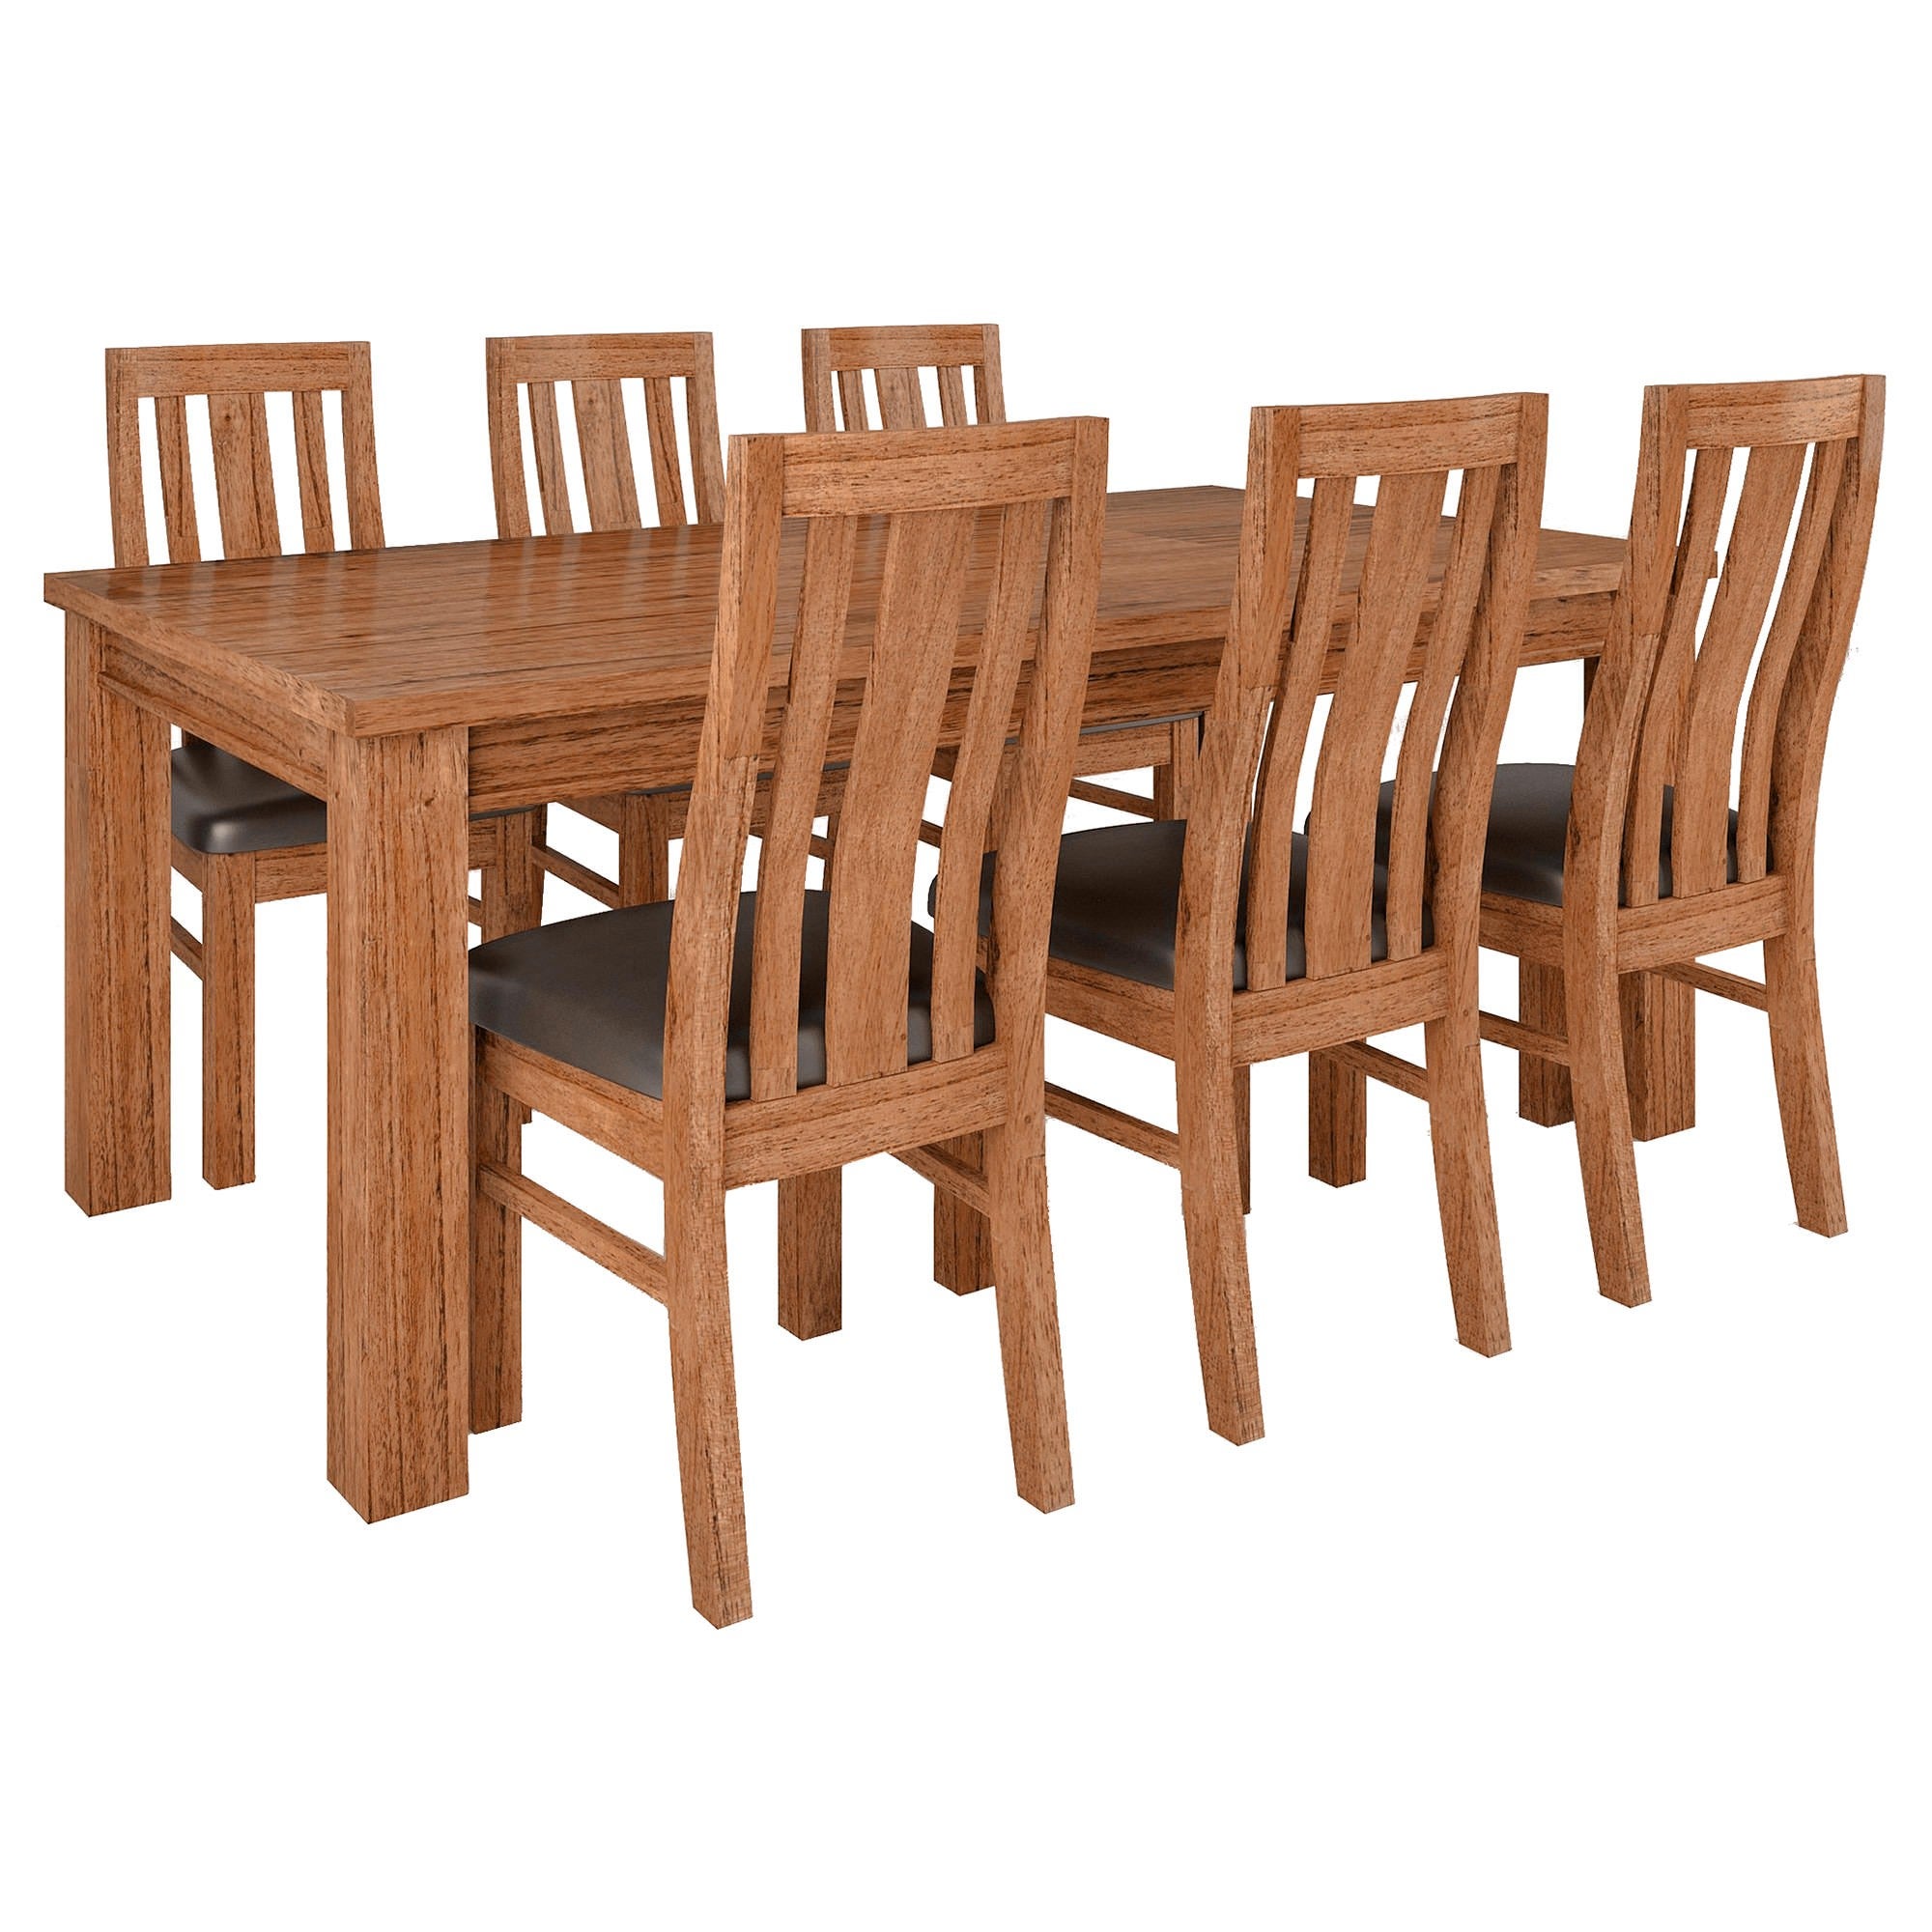 Cooper 7 Piece Mountain Ash Timber Dining Table Set, 190cm